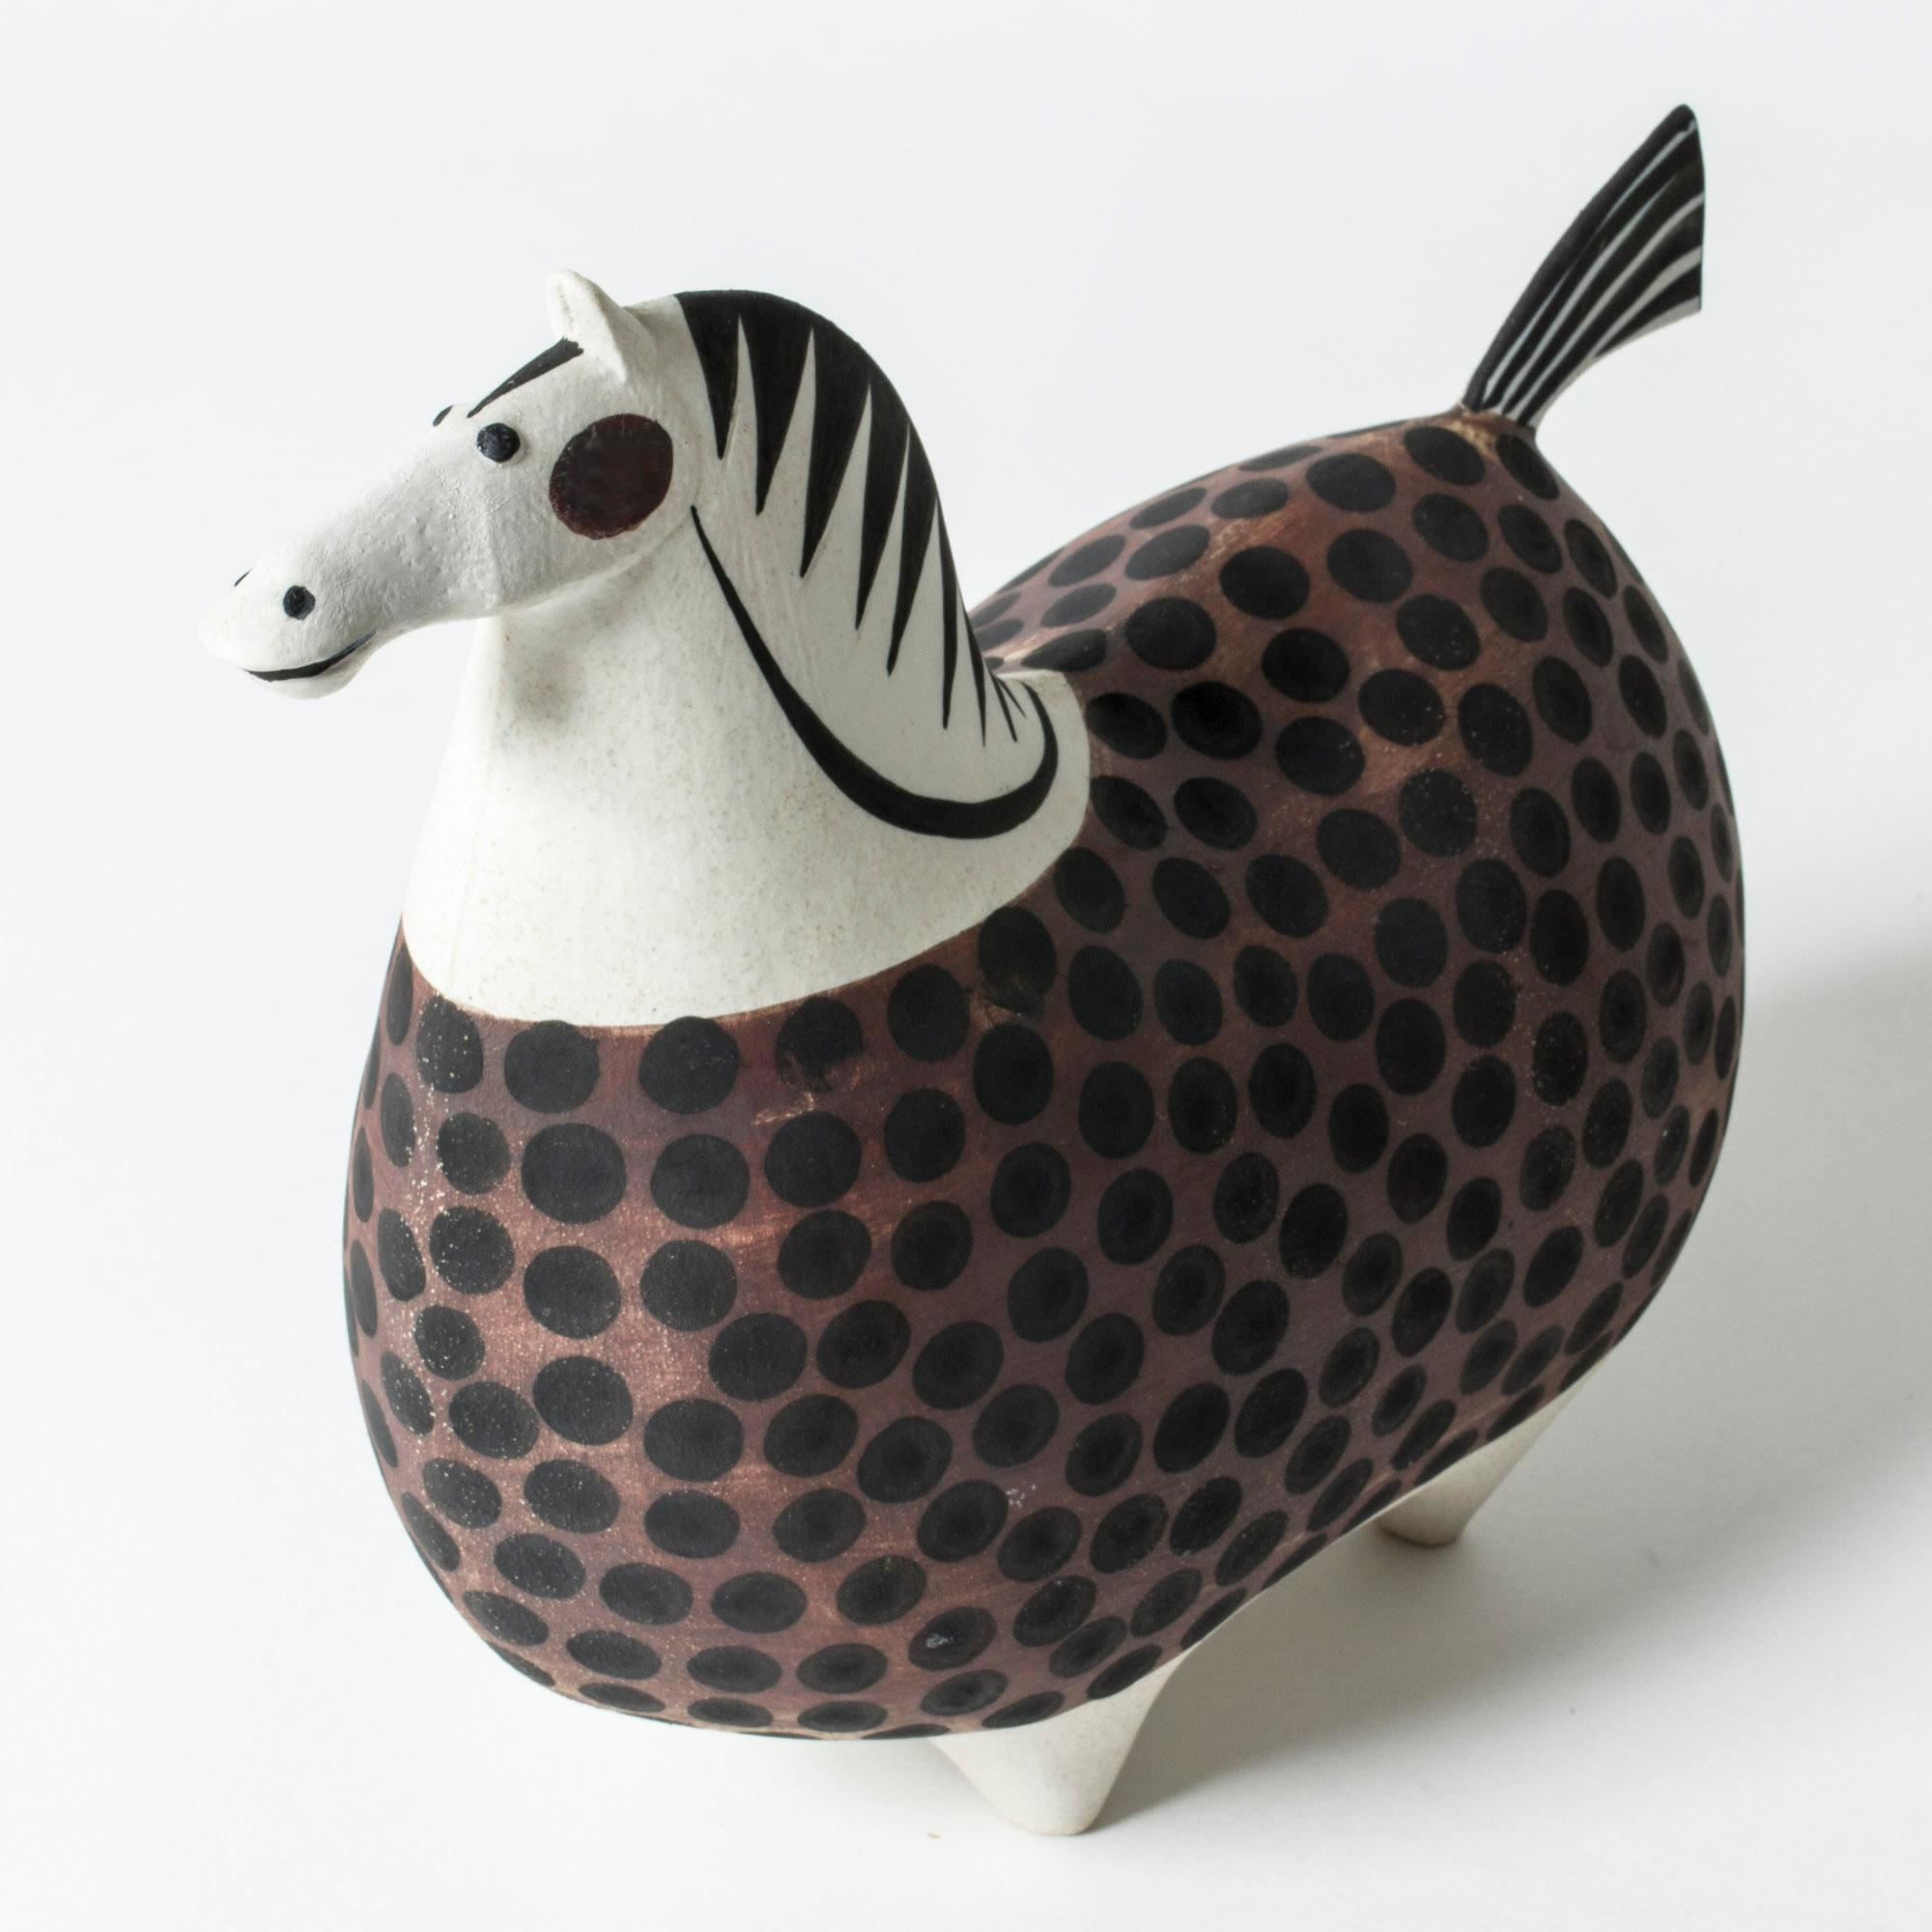 Enchanting ceramic horse figurine, “Springare”, by Stig Lindberg. “Springare” means “Steed”. This design was executed in different sizes at Gustavsbergs Studio, this size is among the larger and rarer. The stylized horse is painted with a brown and